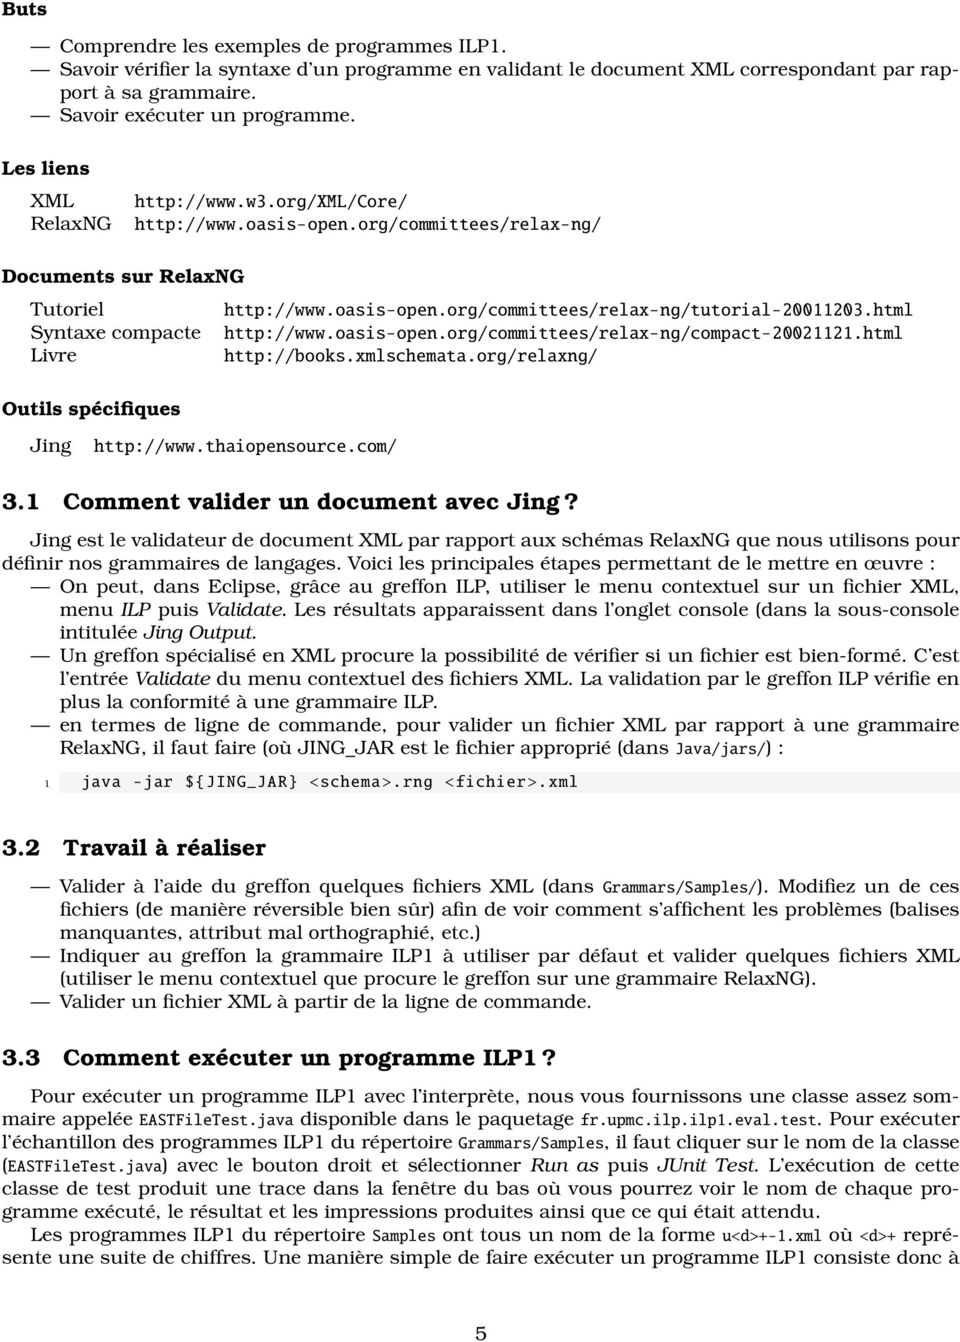 html Syntaxe compacte http://www.oasis-open.org/committees/relax-ng/compact-20021121.html Livre http://books.xmlschemata.org/relaxng/ Outils spécifiques Jing http://www.thaiopensource.com/ 3.